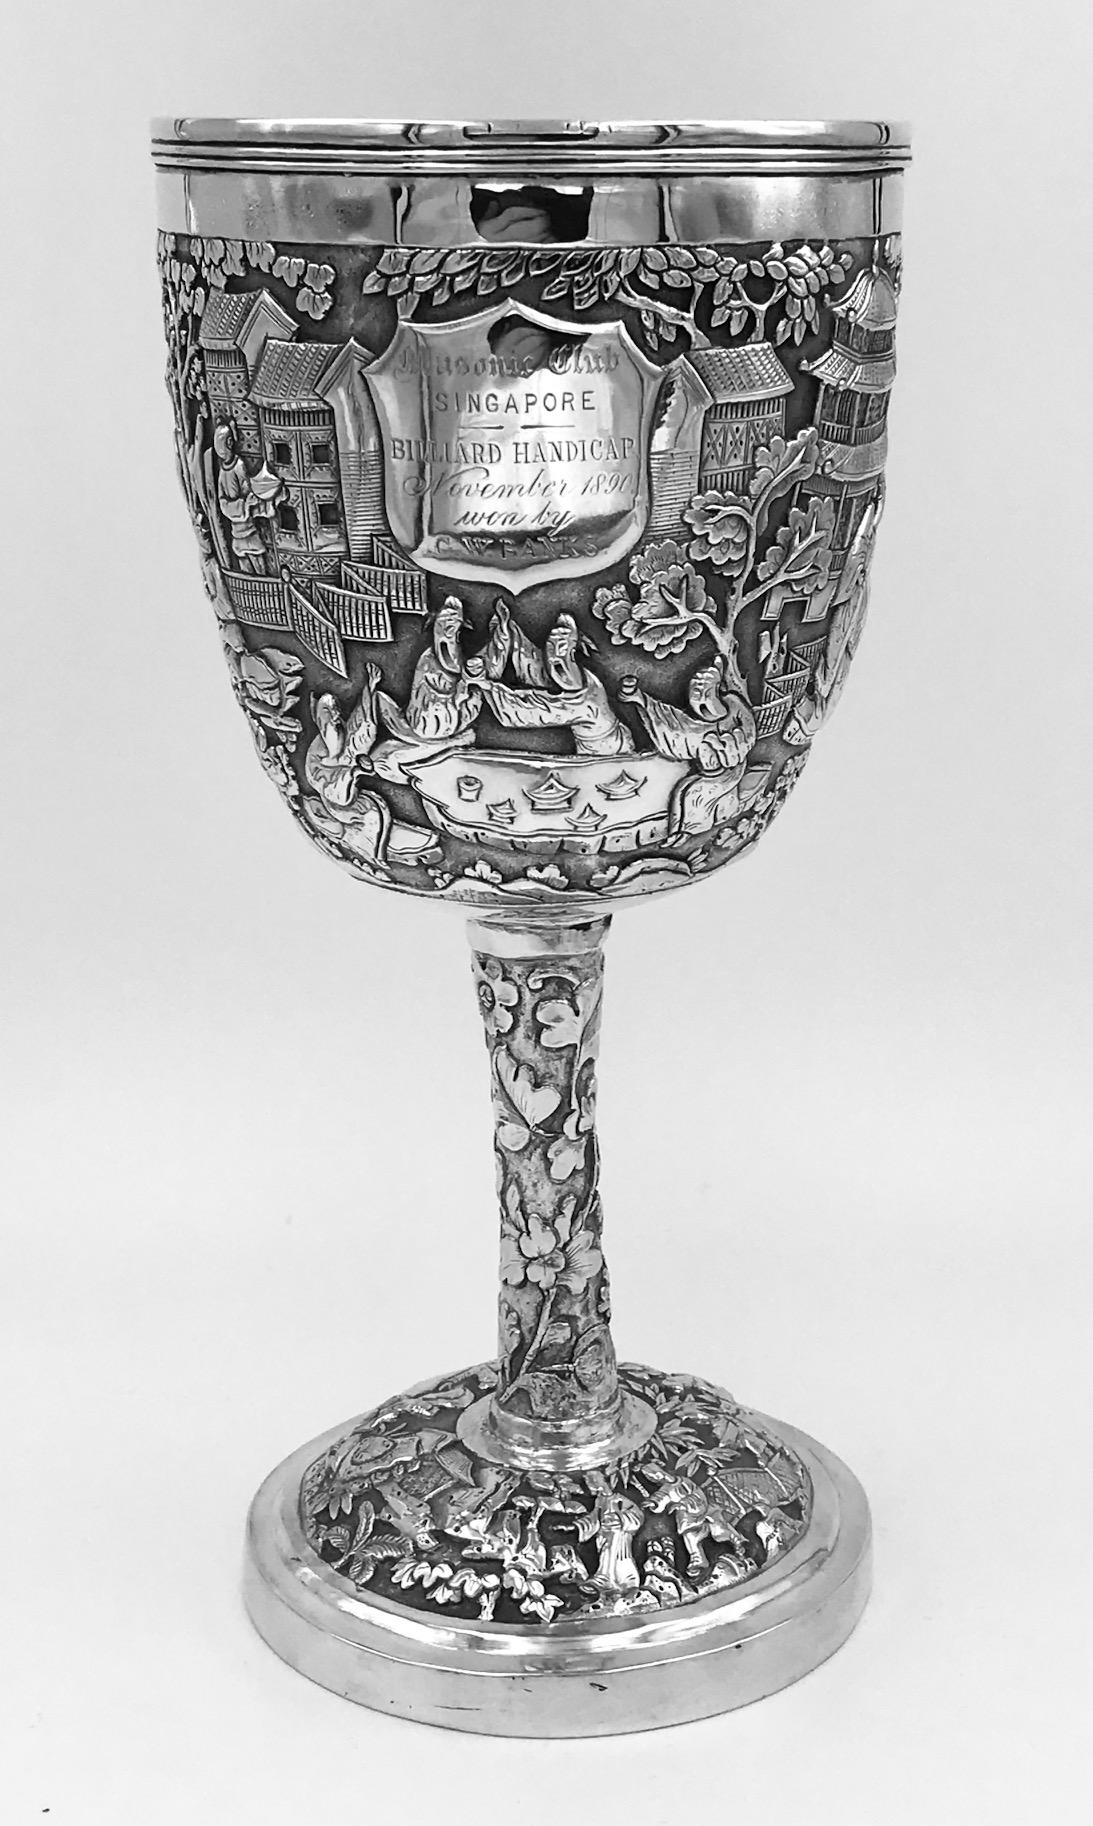 A Chinese Export Silver Goblet with figural scenes depicting scholars playing board games and other Court activities. There is an engraved inscription showing it to be used as a trophy in Singapore in 1890.